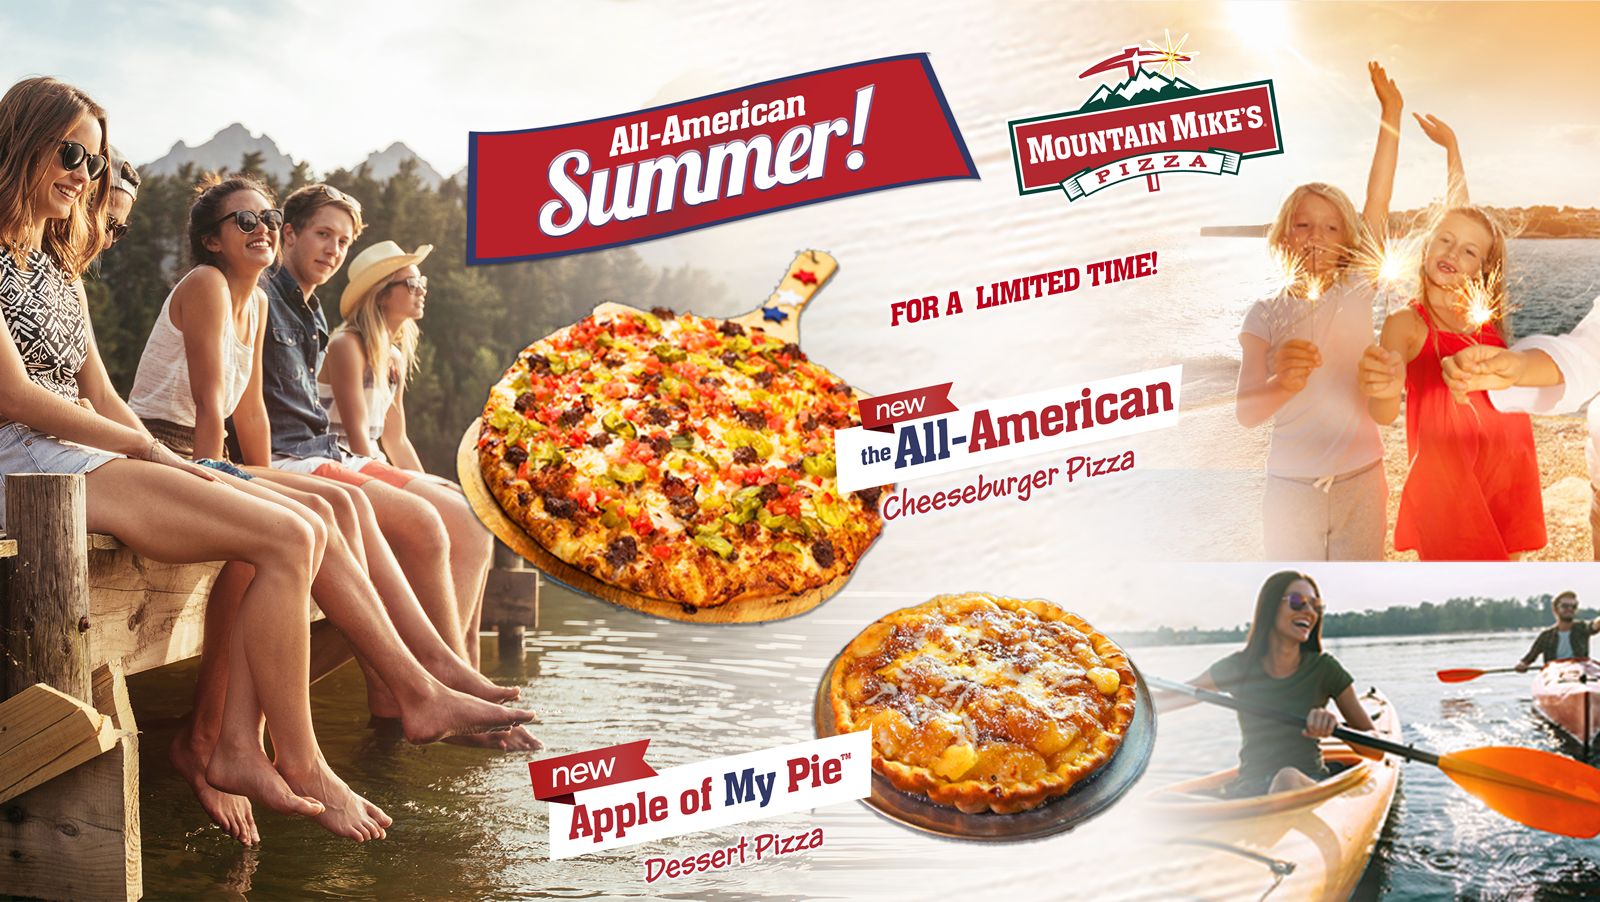 Featured image for “Serving Up Slices of Americana This Summer With New Cheeseburger Pizza and Apple Pie Dessert Pizza”